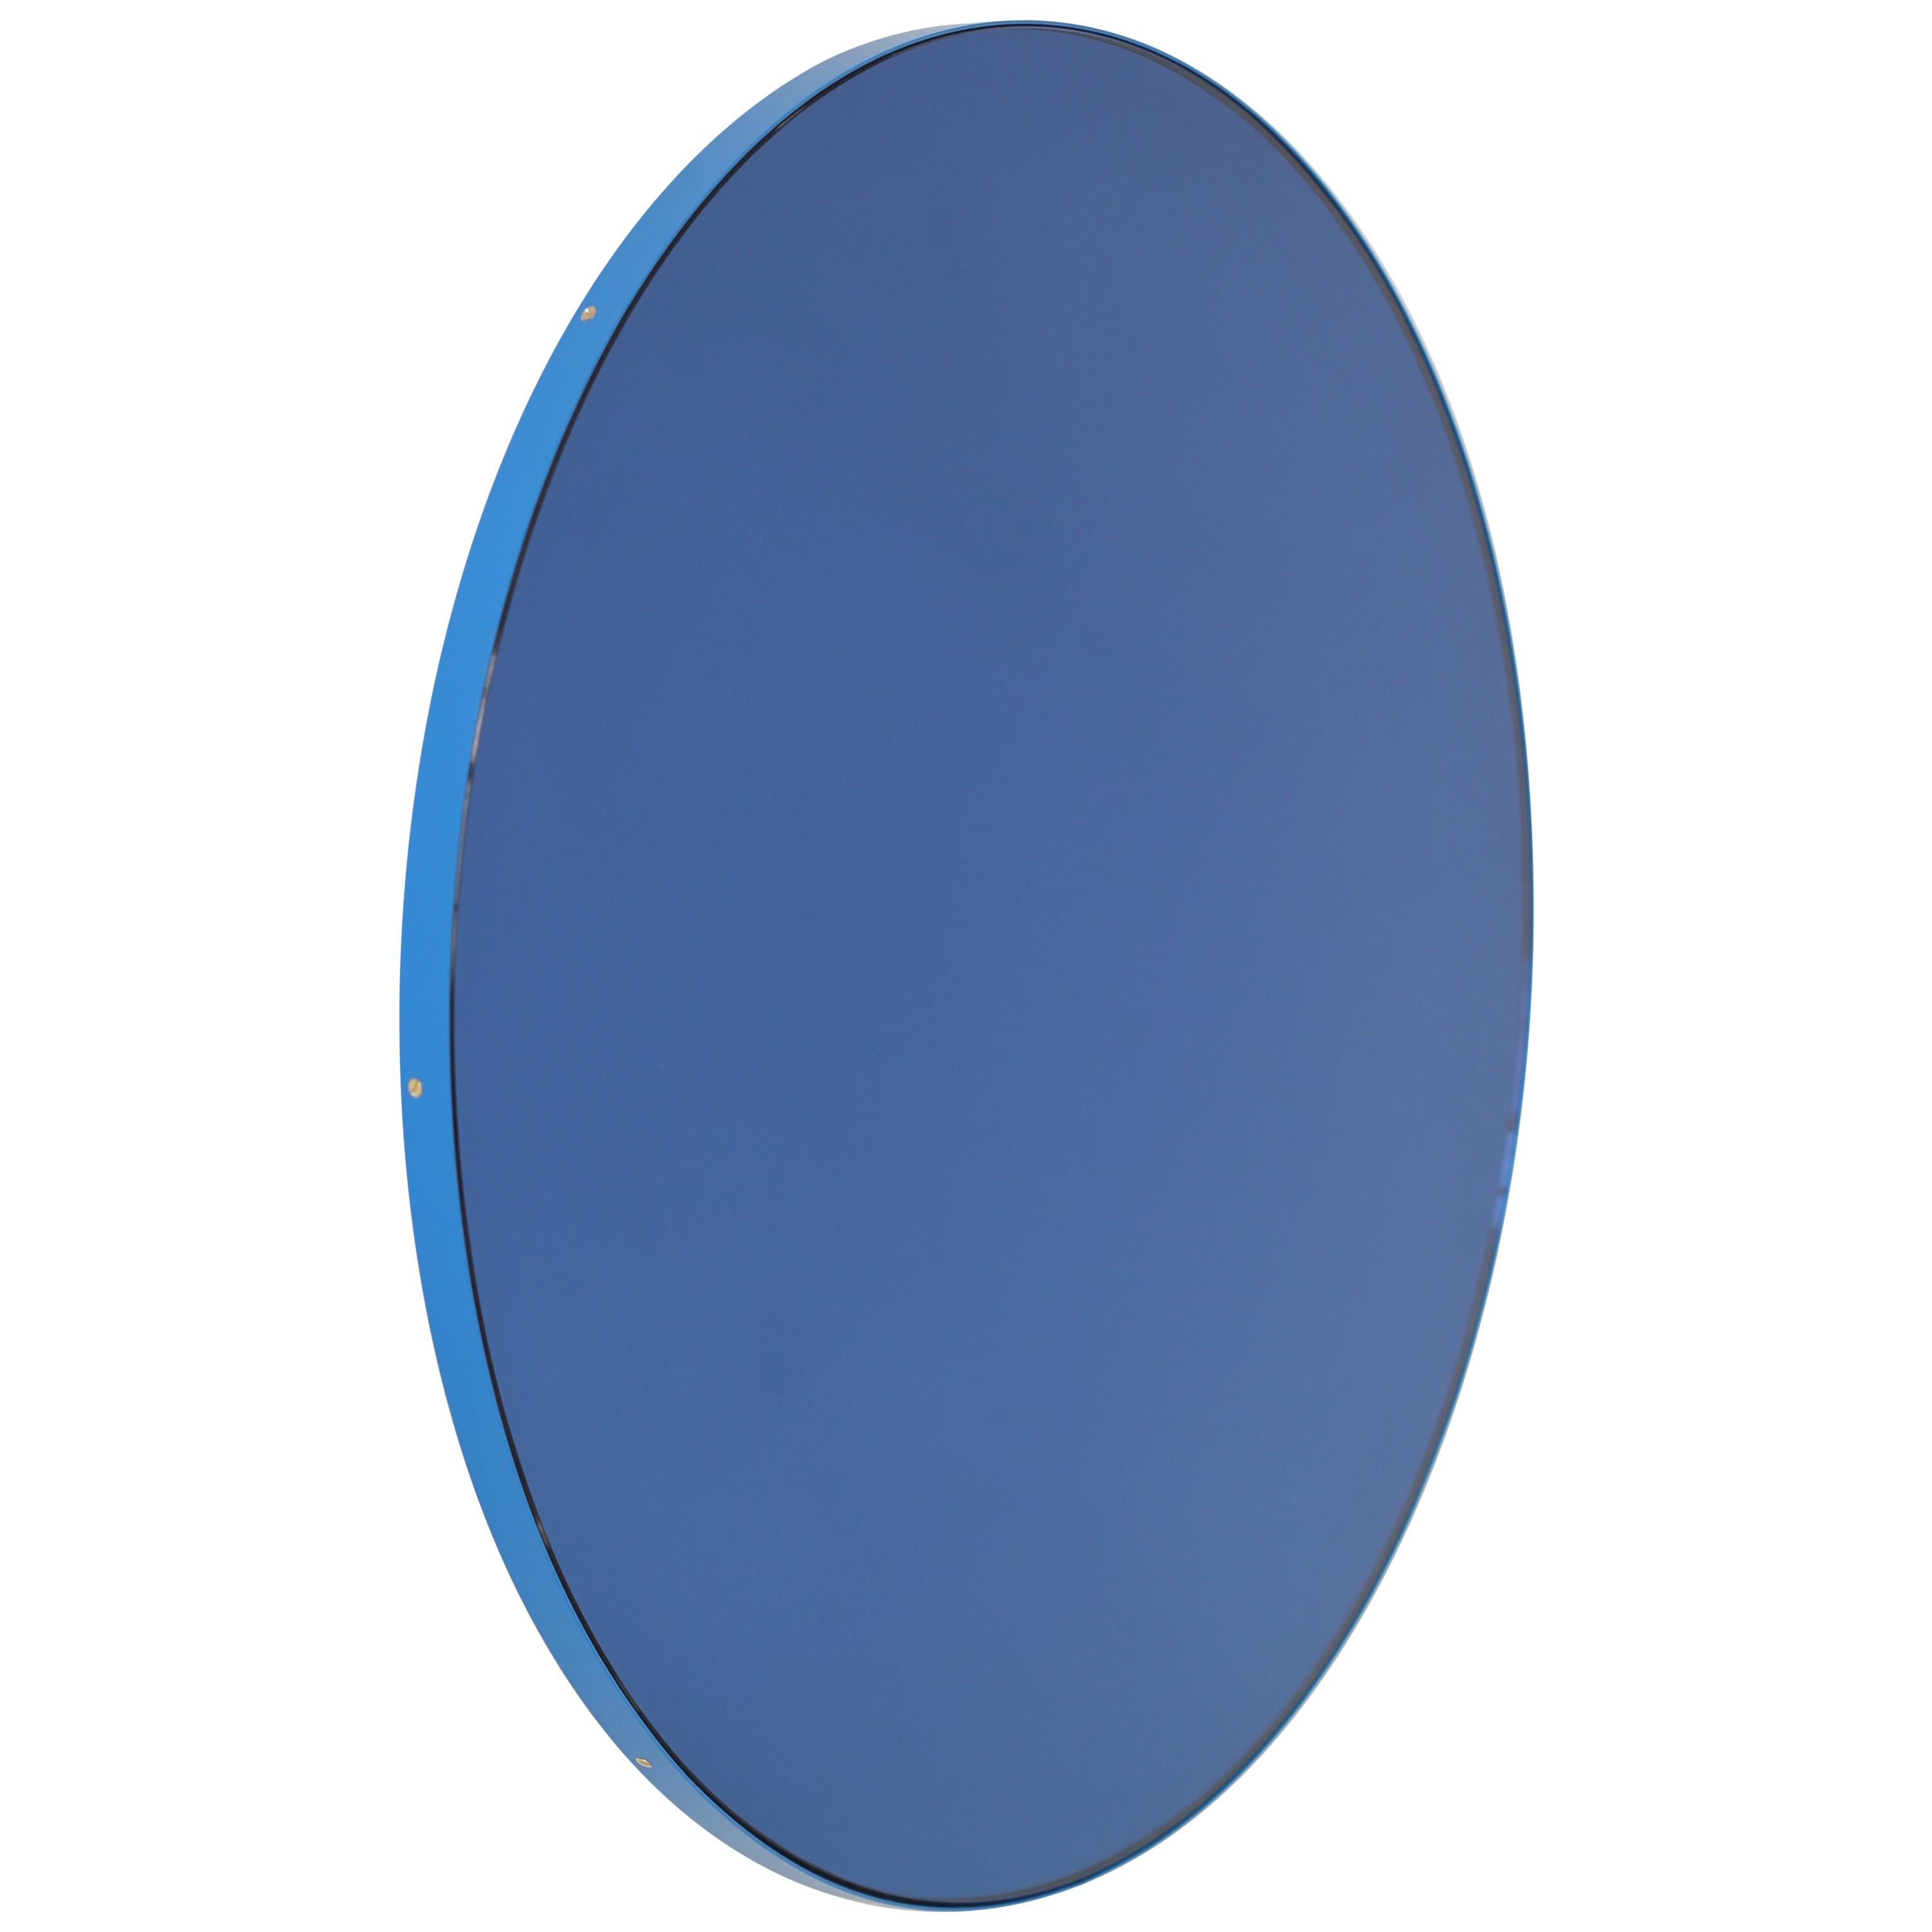 Orbis Blue Tinted Circular Mirror with a Contemporary Blue Frame, Bespoke, XL For Sale